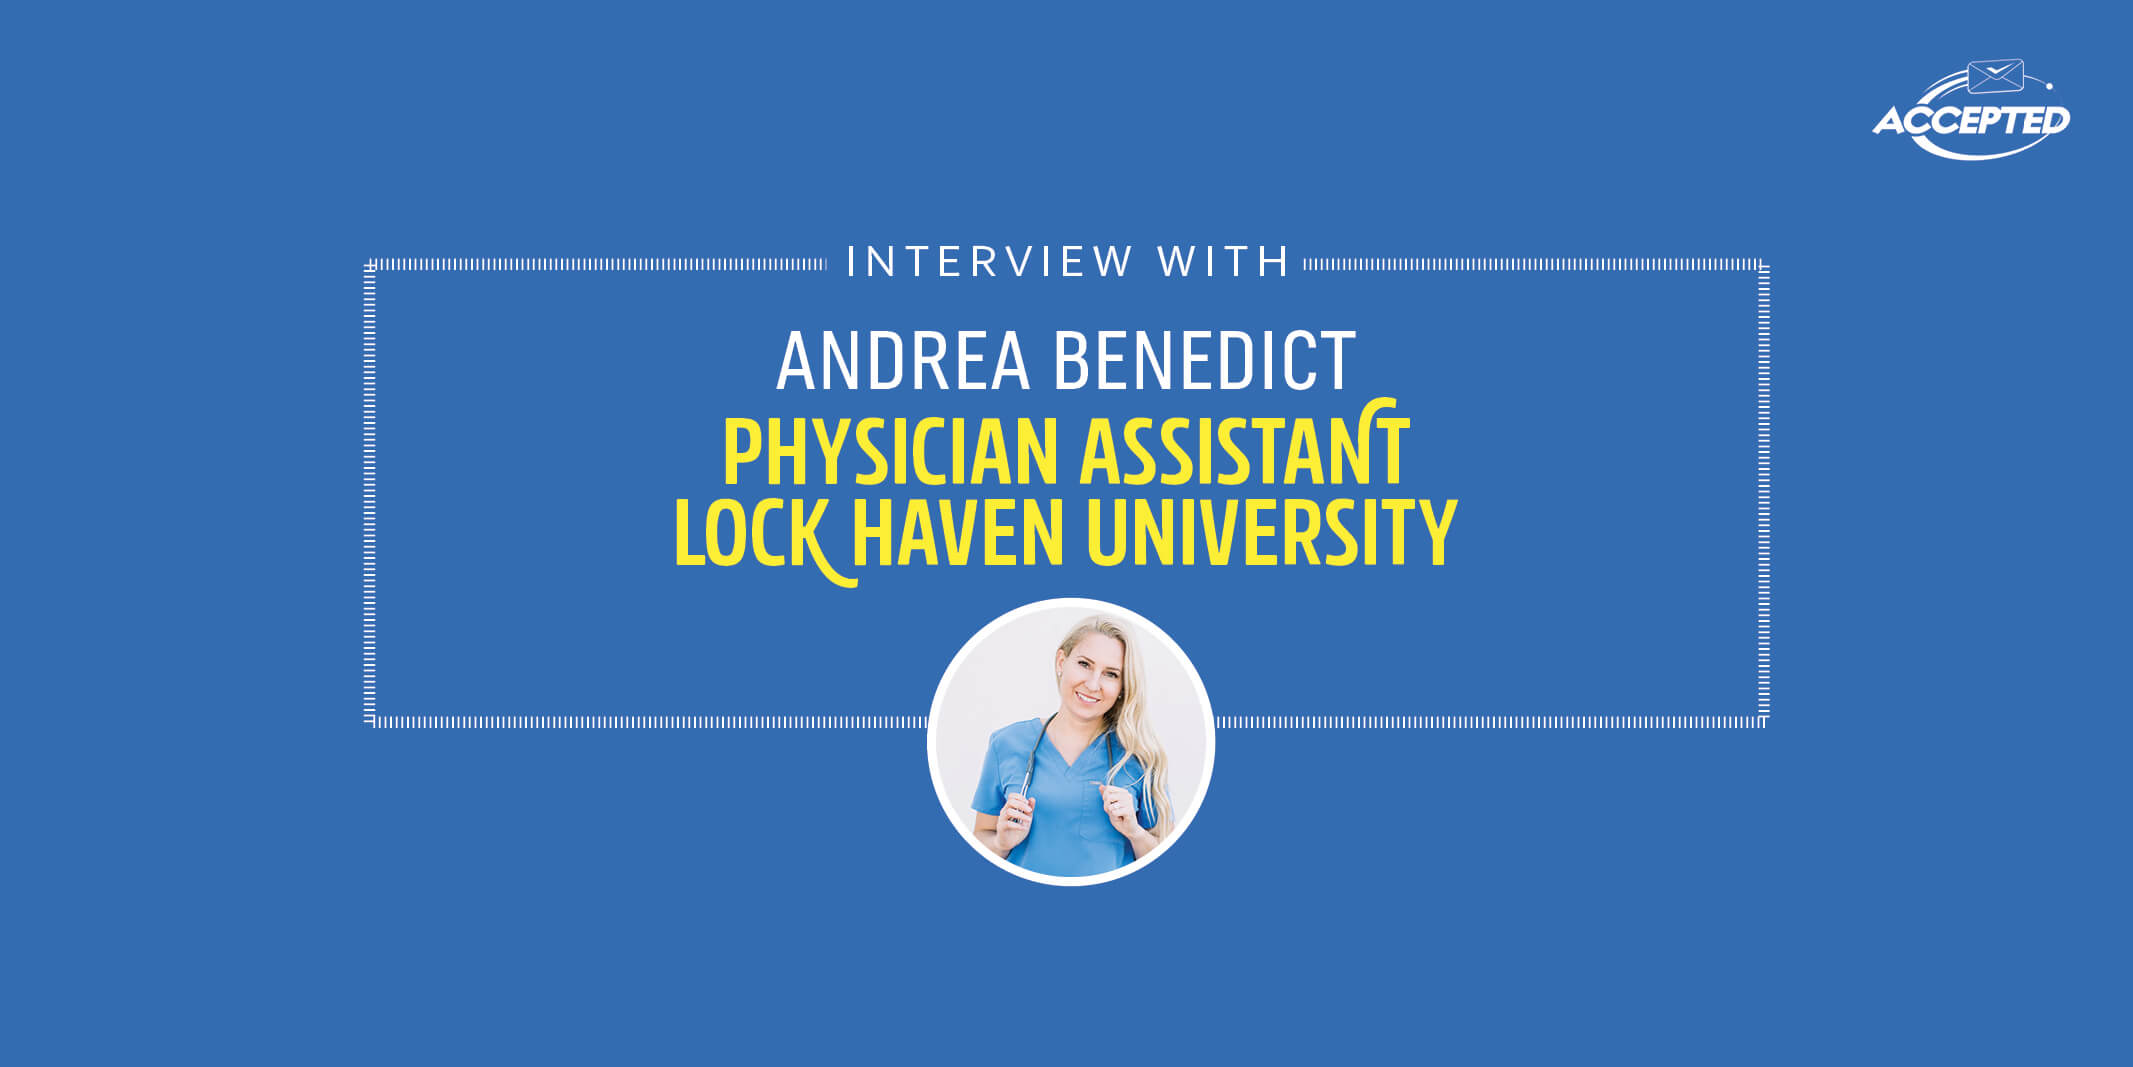 Interview with a Physician Assistant - Andrea Benedict 